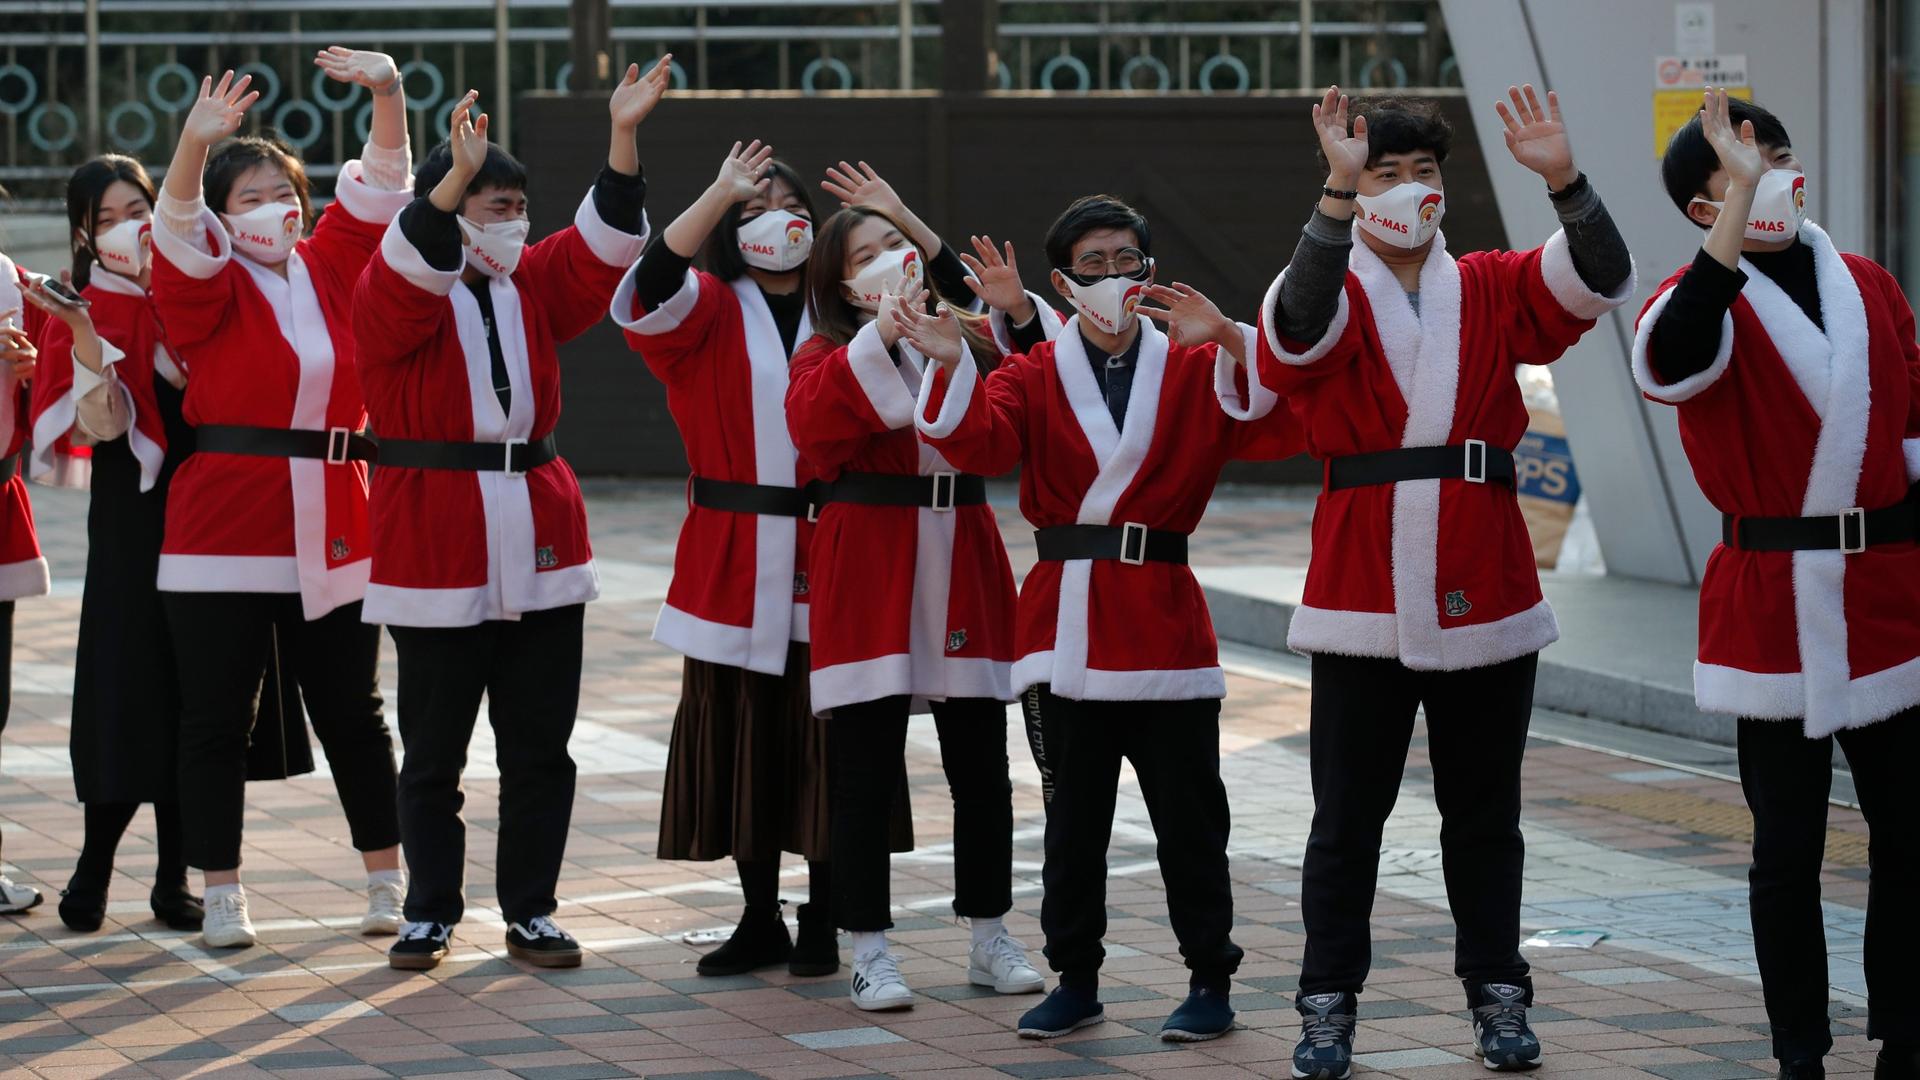 Volunteers wearing face masks wave after they load boxes onto a delivery truck during an event to send Christmas gifts for the underprivileged in Seoul, South Korea, Dec. 22, 2020.